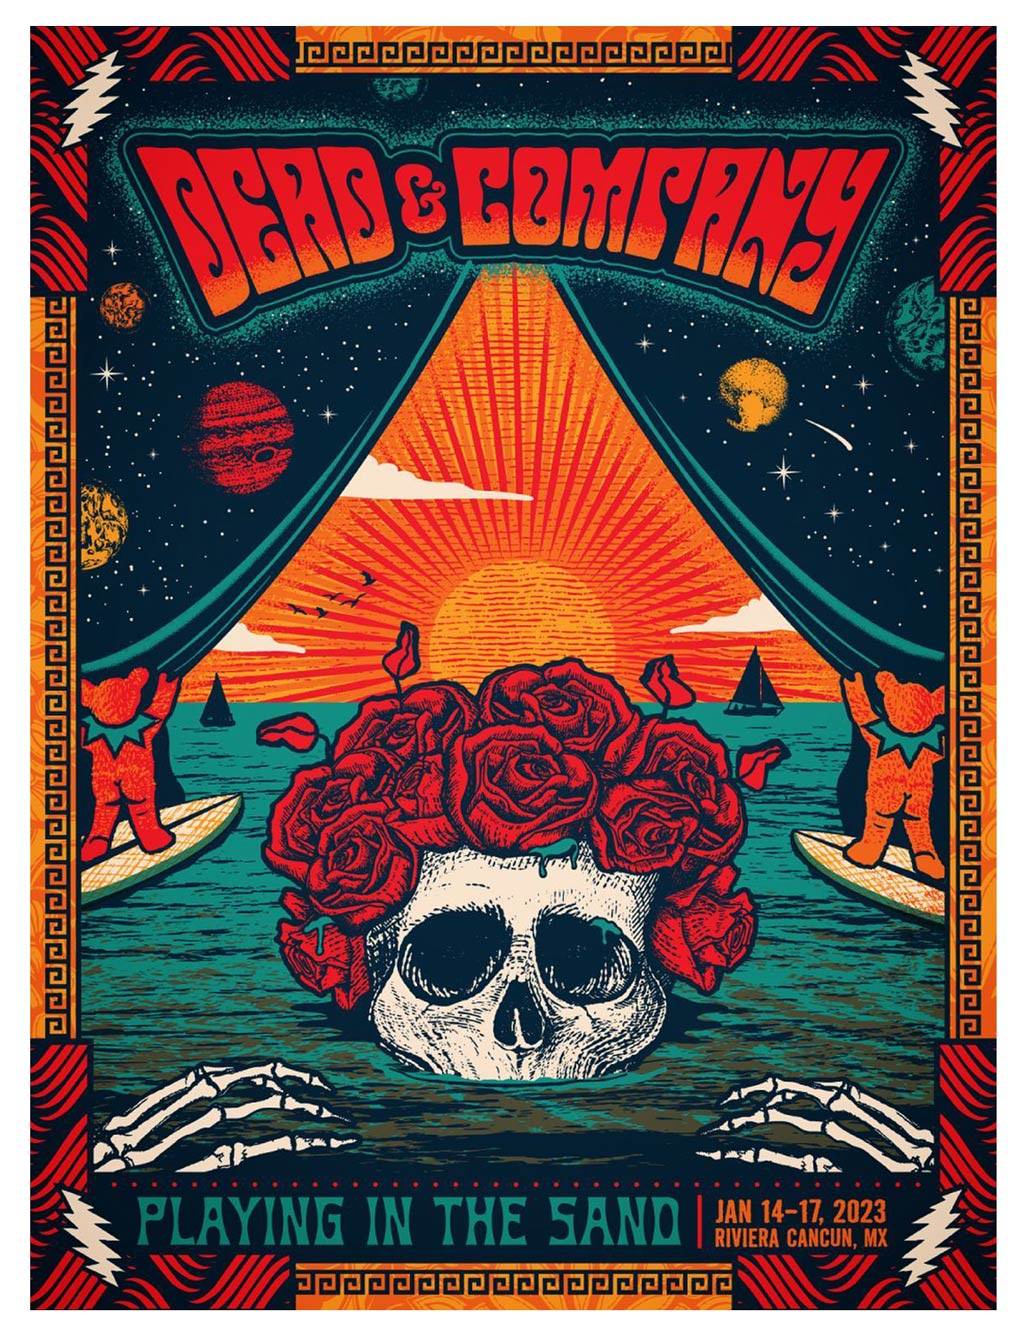 Dead & Company Poster with Engraving Style